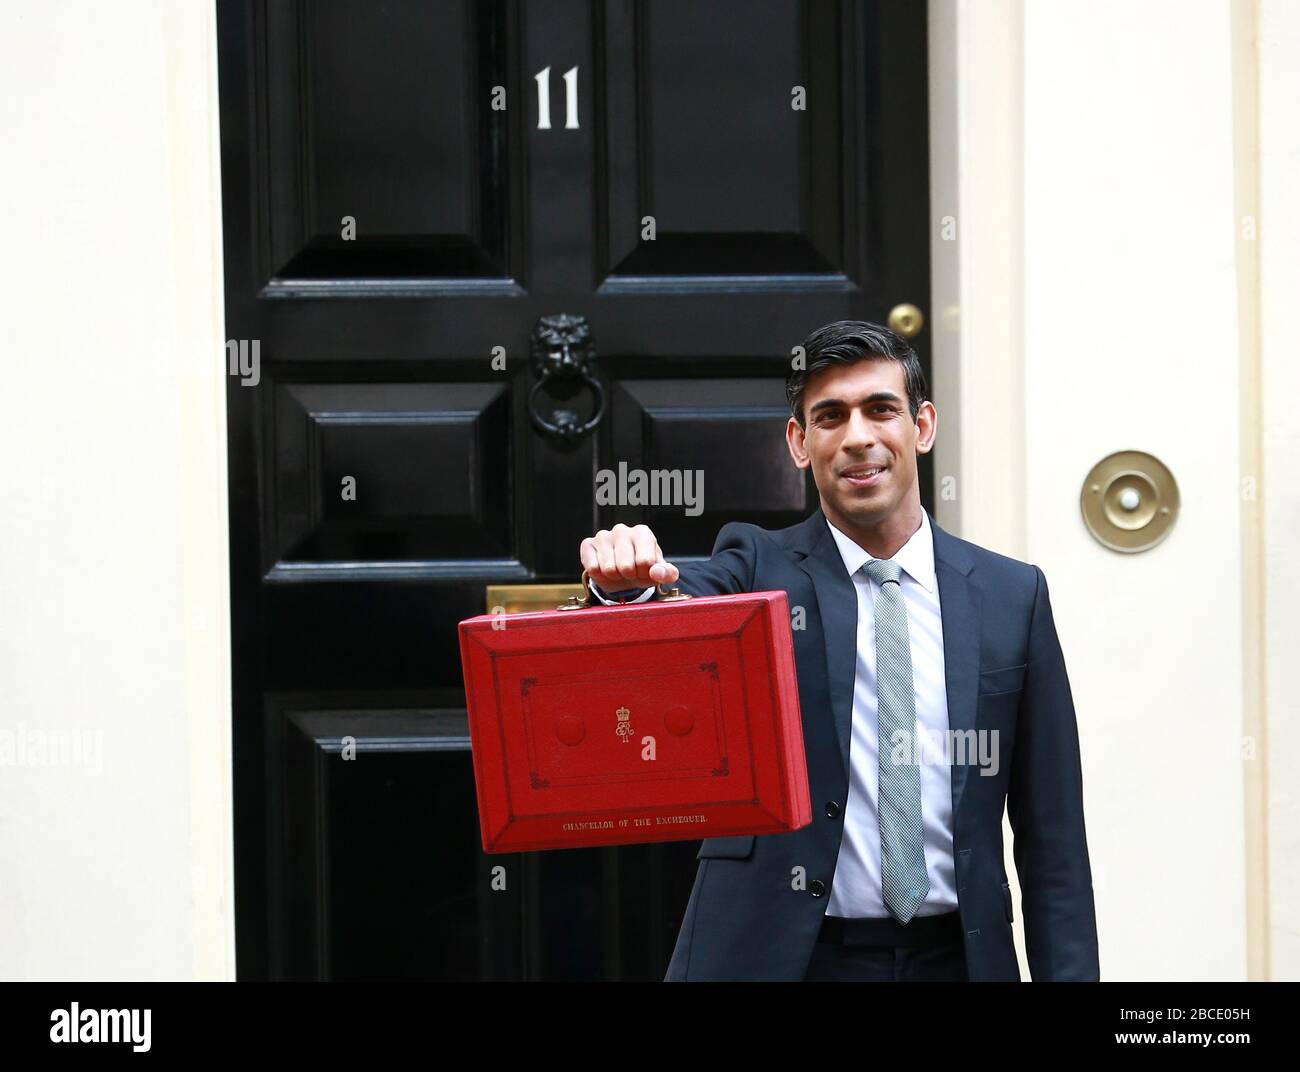 March 11, 2020: Rishi Sunak, Chancellor of the Exchequer, leaves No.11 Downing Street to present his budget at the House of Commons in London, UK. Stock Photo